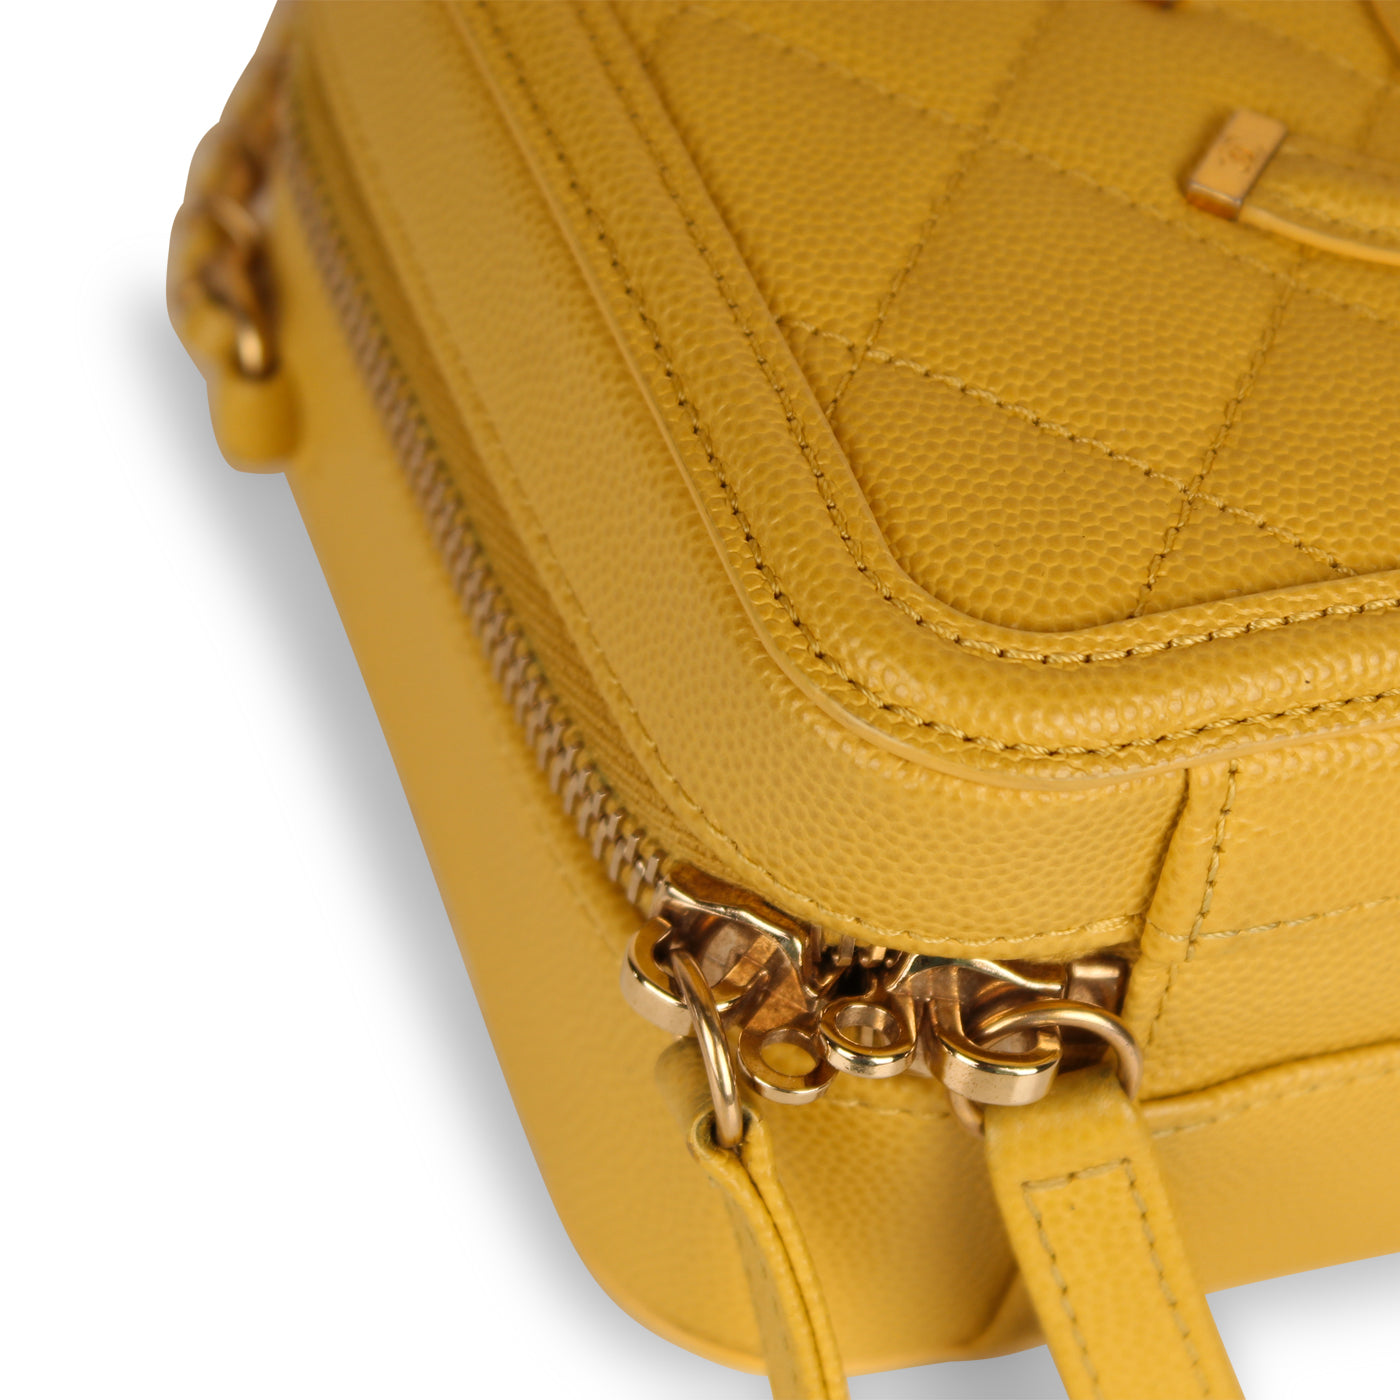 CHANEL Caviar Quilted Small CC Filigree Vanity Case Yellow 221729